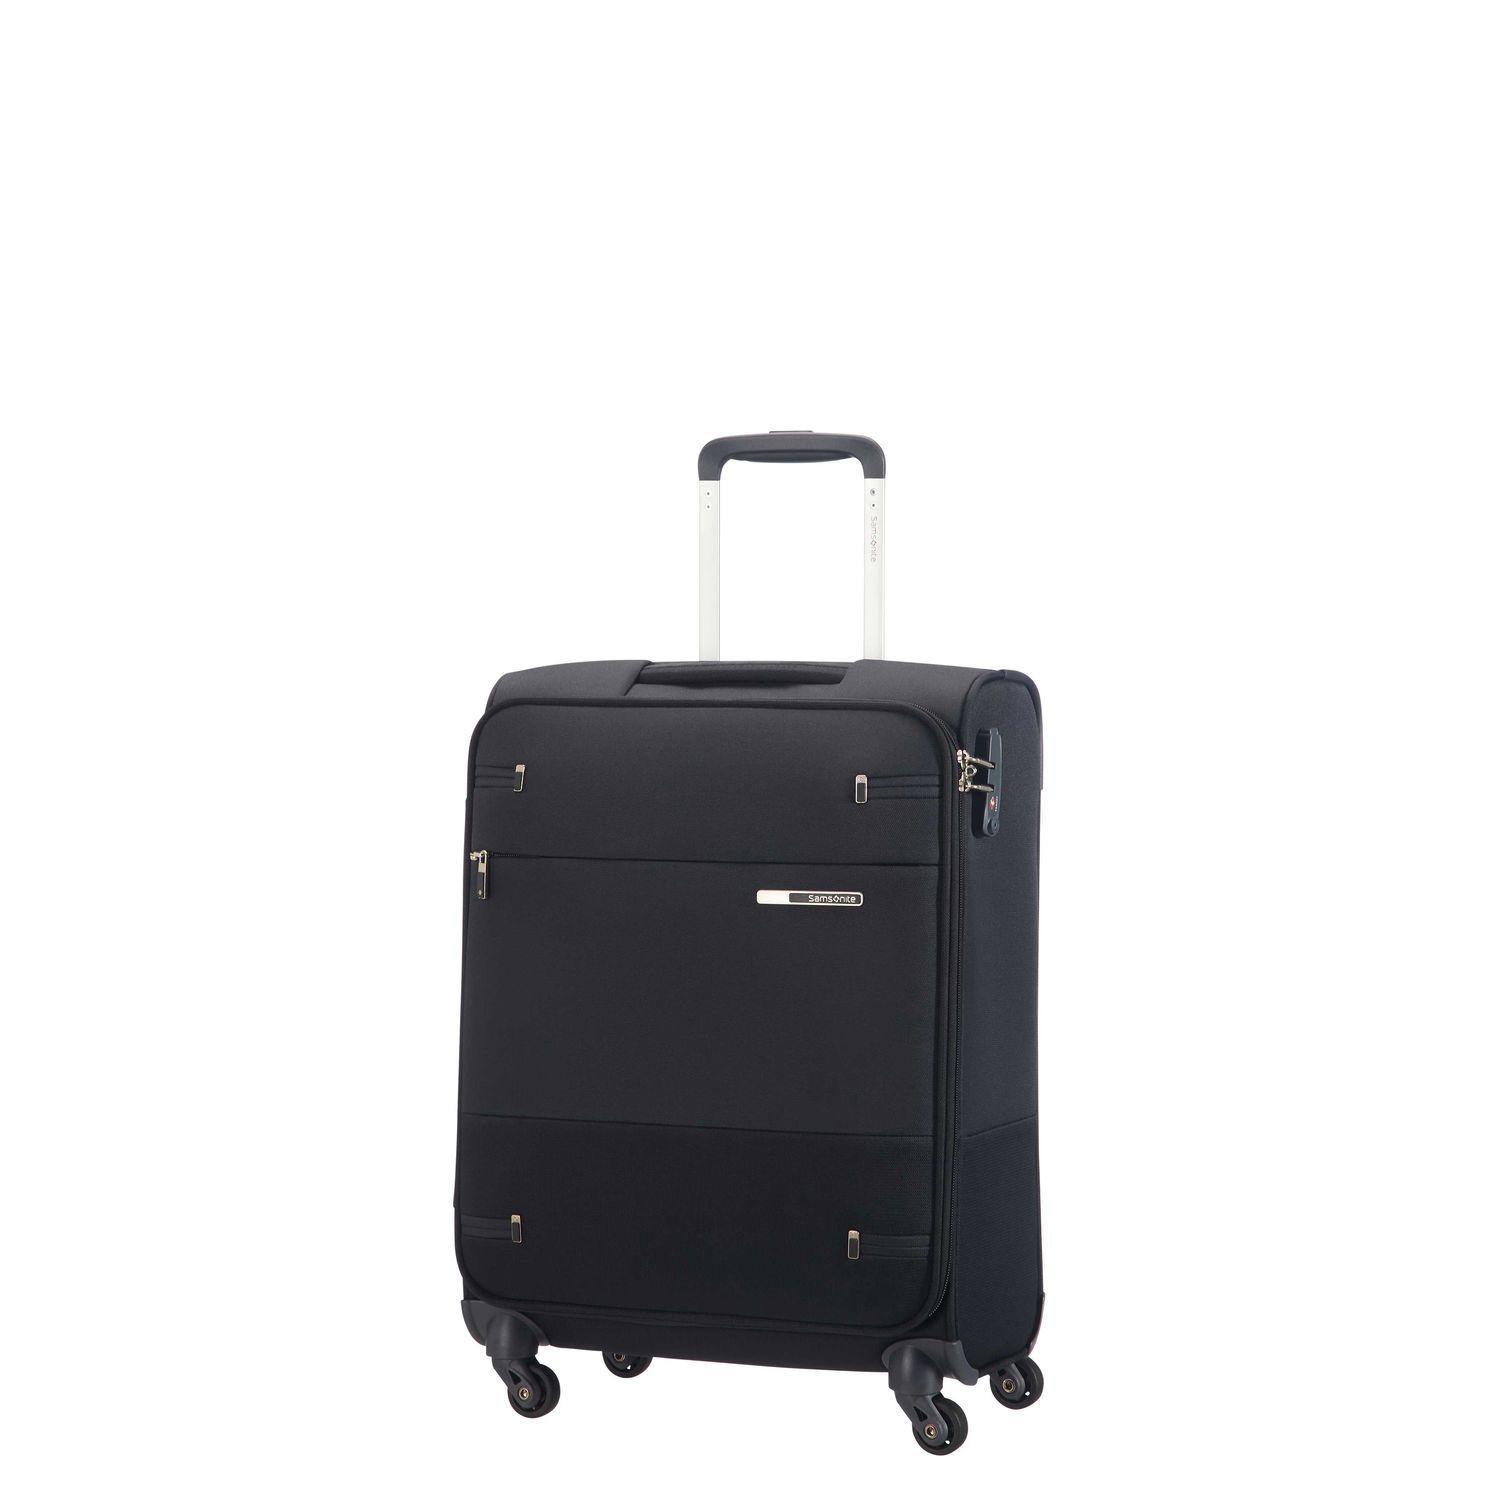 Samsonite Base Boost Spinner Carry-On Luggage Red